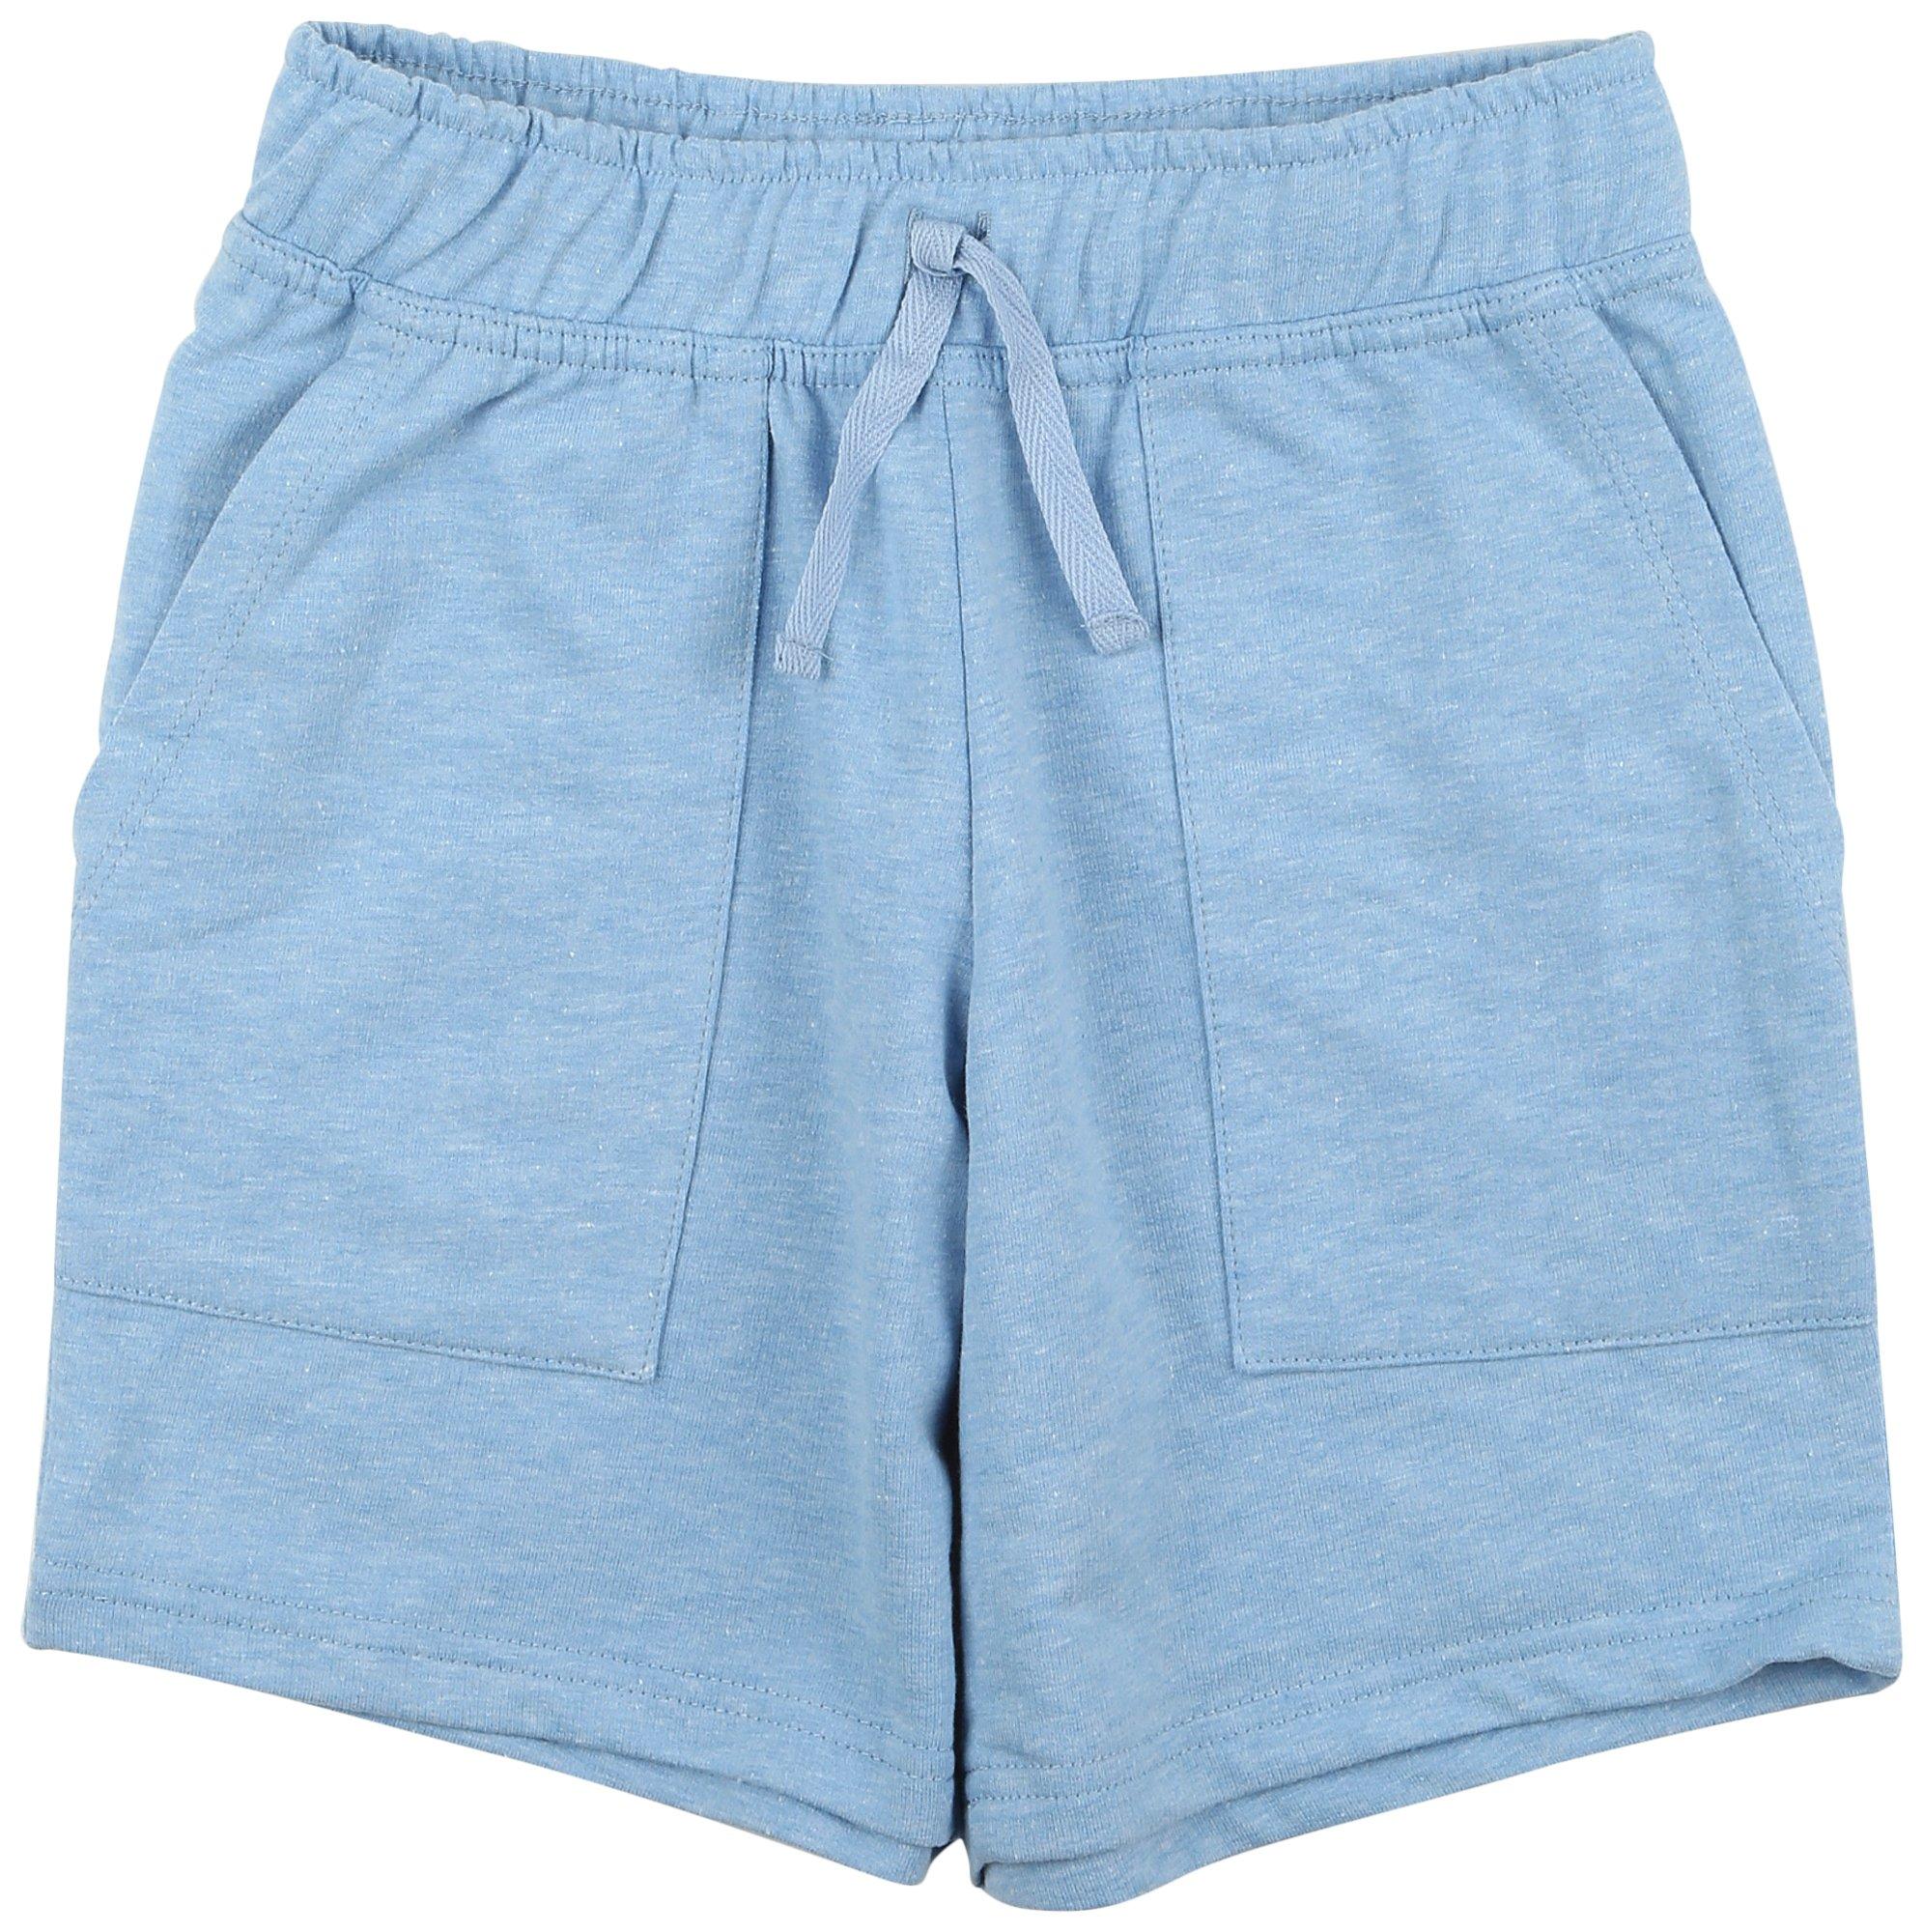 DOT & ZAZZ Little Boys French Terry Solid Shorts